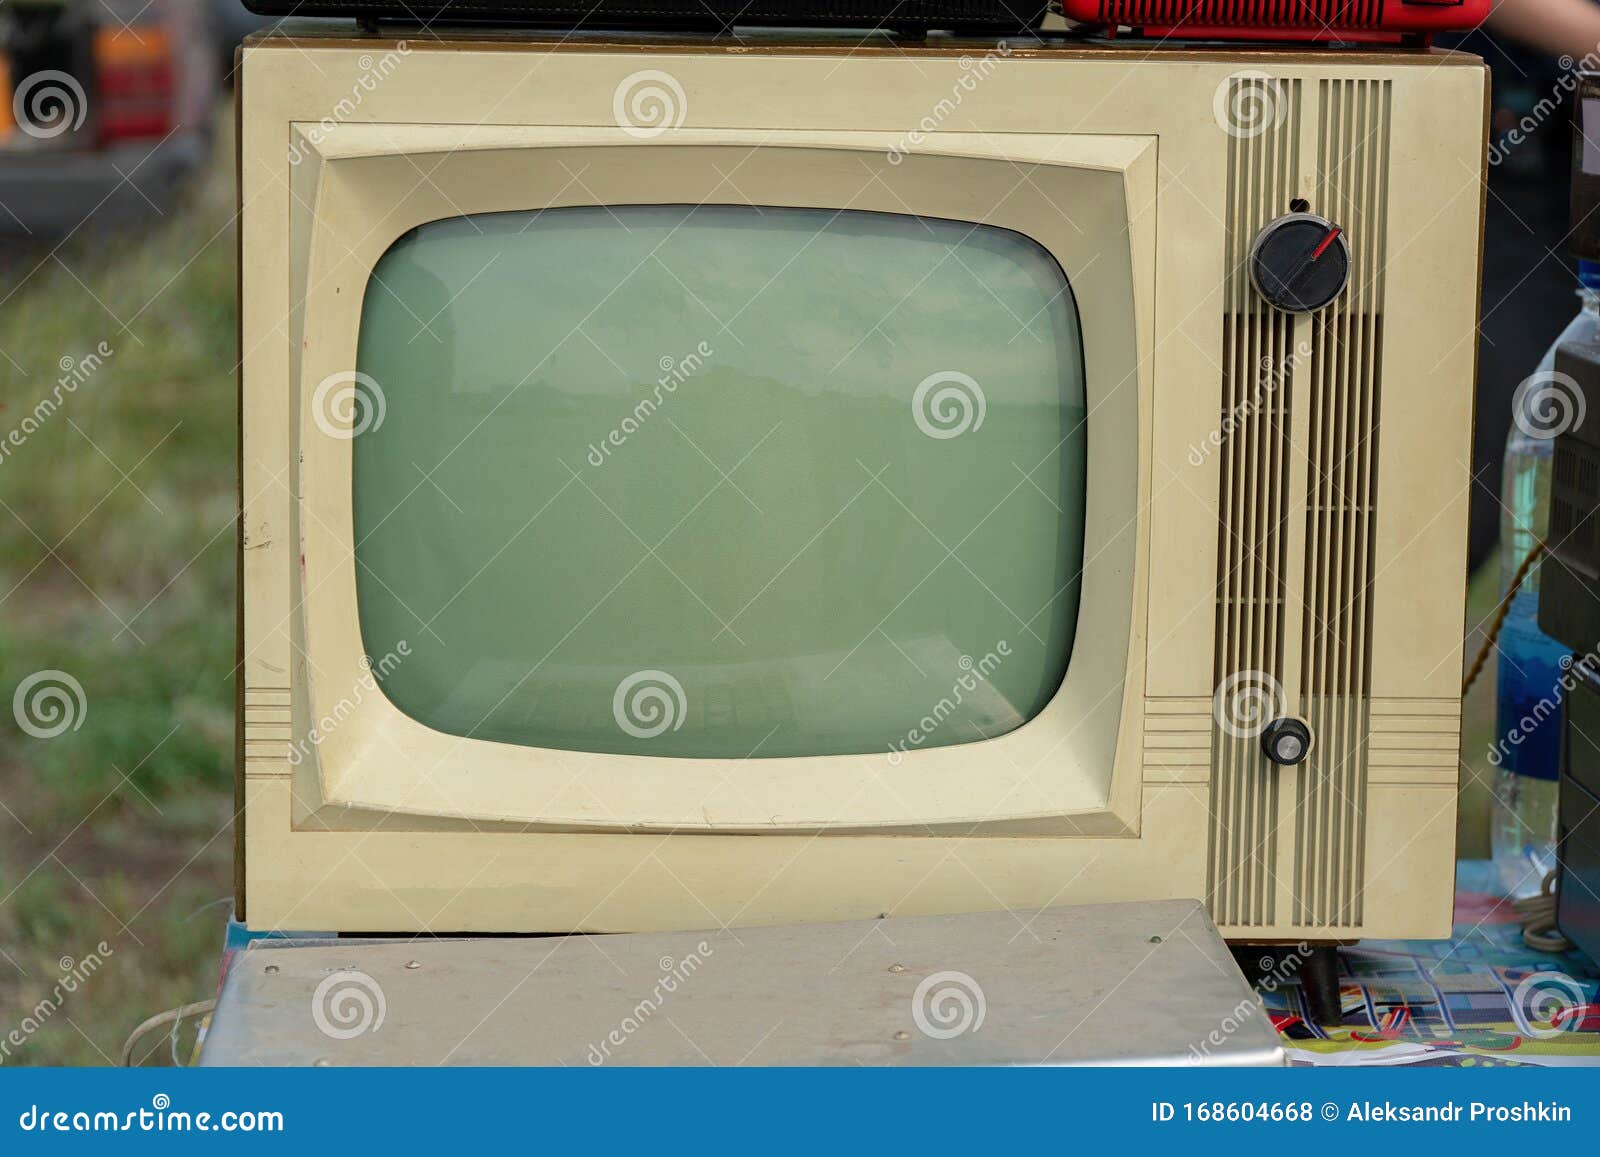 an old-fashioned analog tv in gray with a kinescope